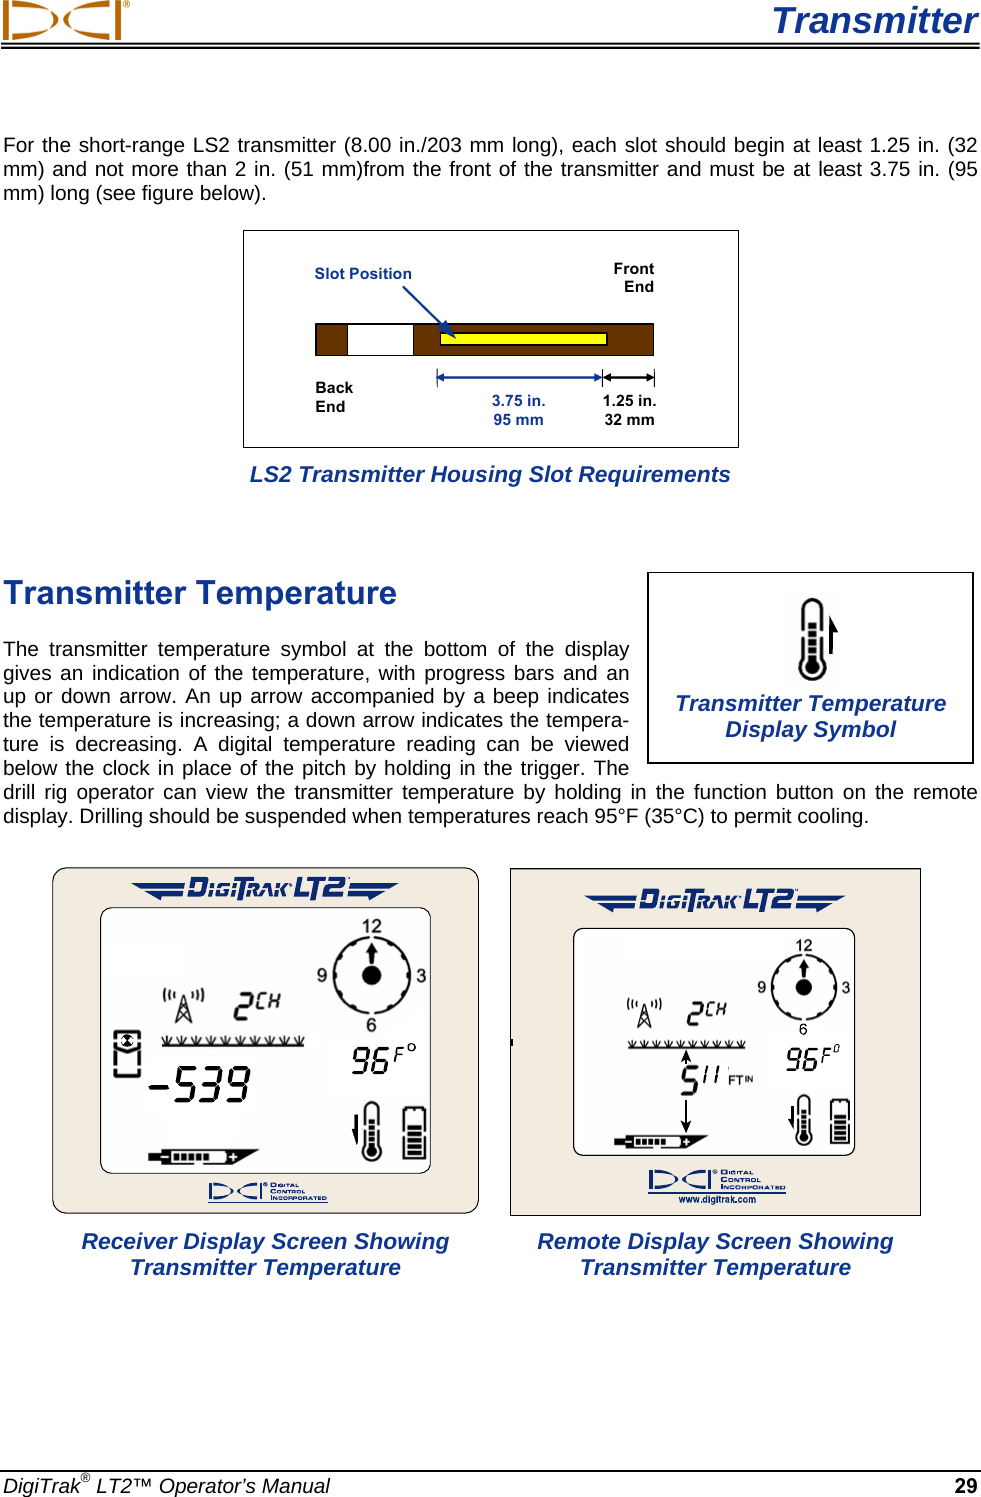  Transmitter DigiTrak® LT2™ Operator’s Manual 29 For the short-range LS2 transmitter (8.00 in./203 mm long), each slot should begin at least 1.25 in. (32 mm) and not more than 2 in. (51 mm)from the front of the transmitter and must be at least 3.75 in. (95 mm) long (see figure below).  FrontEnd Back End  3.75 in.95 mm 1.25 in.32 mm Slot Position LS2 Transmitter Housing Slot Requirements  Transmitter Temperature  The transmitter temperature symbol at the bottom of the display gives an indication of the temperature, with progress bars and an up or down arrow. An up arrow accompanied by a beep indicates the temperature is increasing; a down arrow indicates the tempera-ture is decreasing. A digital temperature reading can be viewed below the clock in place of the pitch by holding in the trigger. The drill rig operator can view the transmitter temperature by holding in the function button on the remote display. Drilling should be suspended when temperatures reach 95°F (35°C) to permit cooling.      Receiver Display Screen Showing   Remote Display Screen Showing   Transmitter Temperature  Transmitter Temperature   Transmitter Temperature Display Symbol 